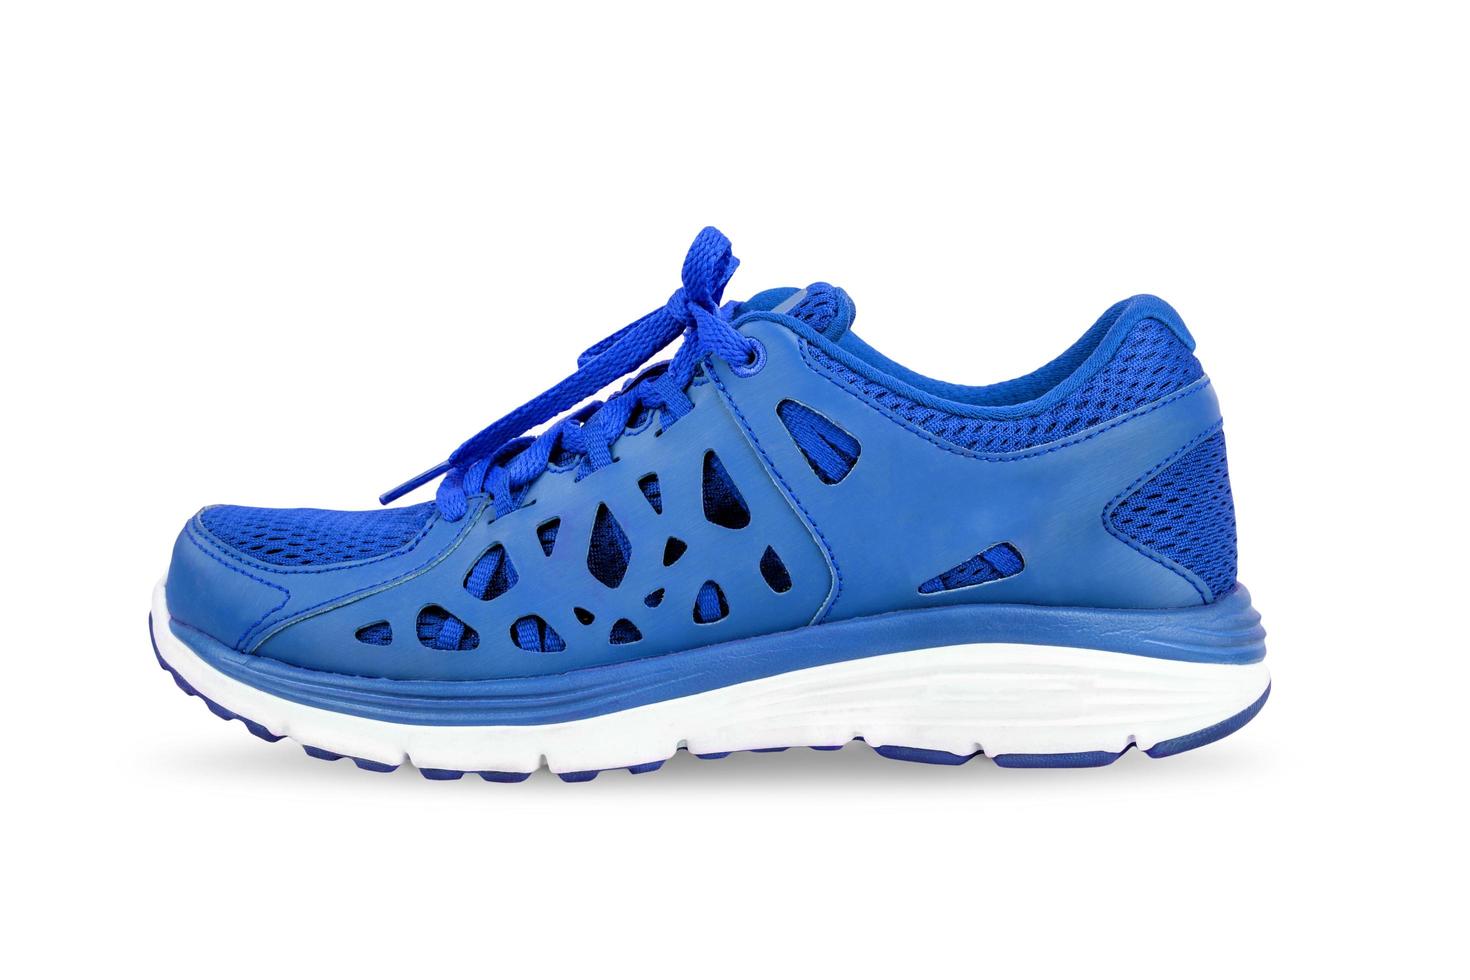 blue sport running shoes isolated on white background photo